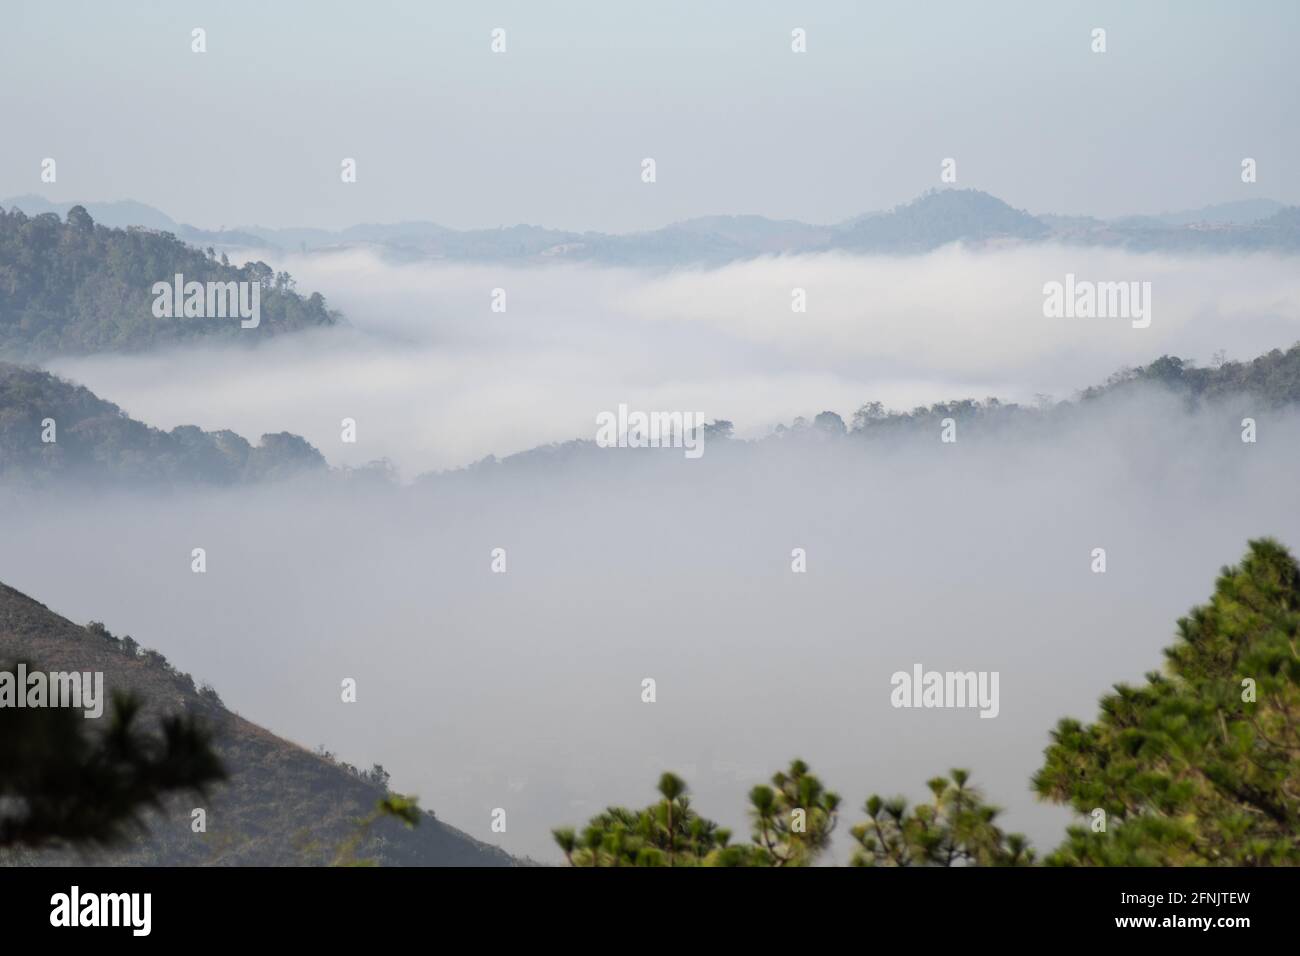 View over mist in a valley with rolling hilles in distance layers between Kalaw and Inle Lake, Shan state, Myanmar Stock Photo